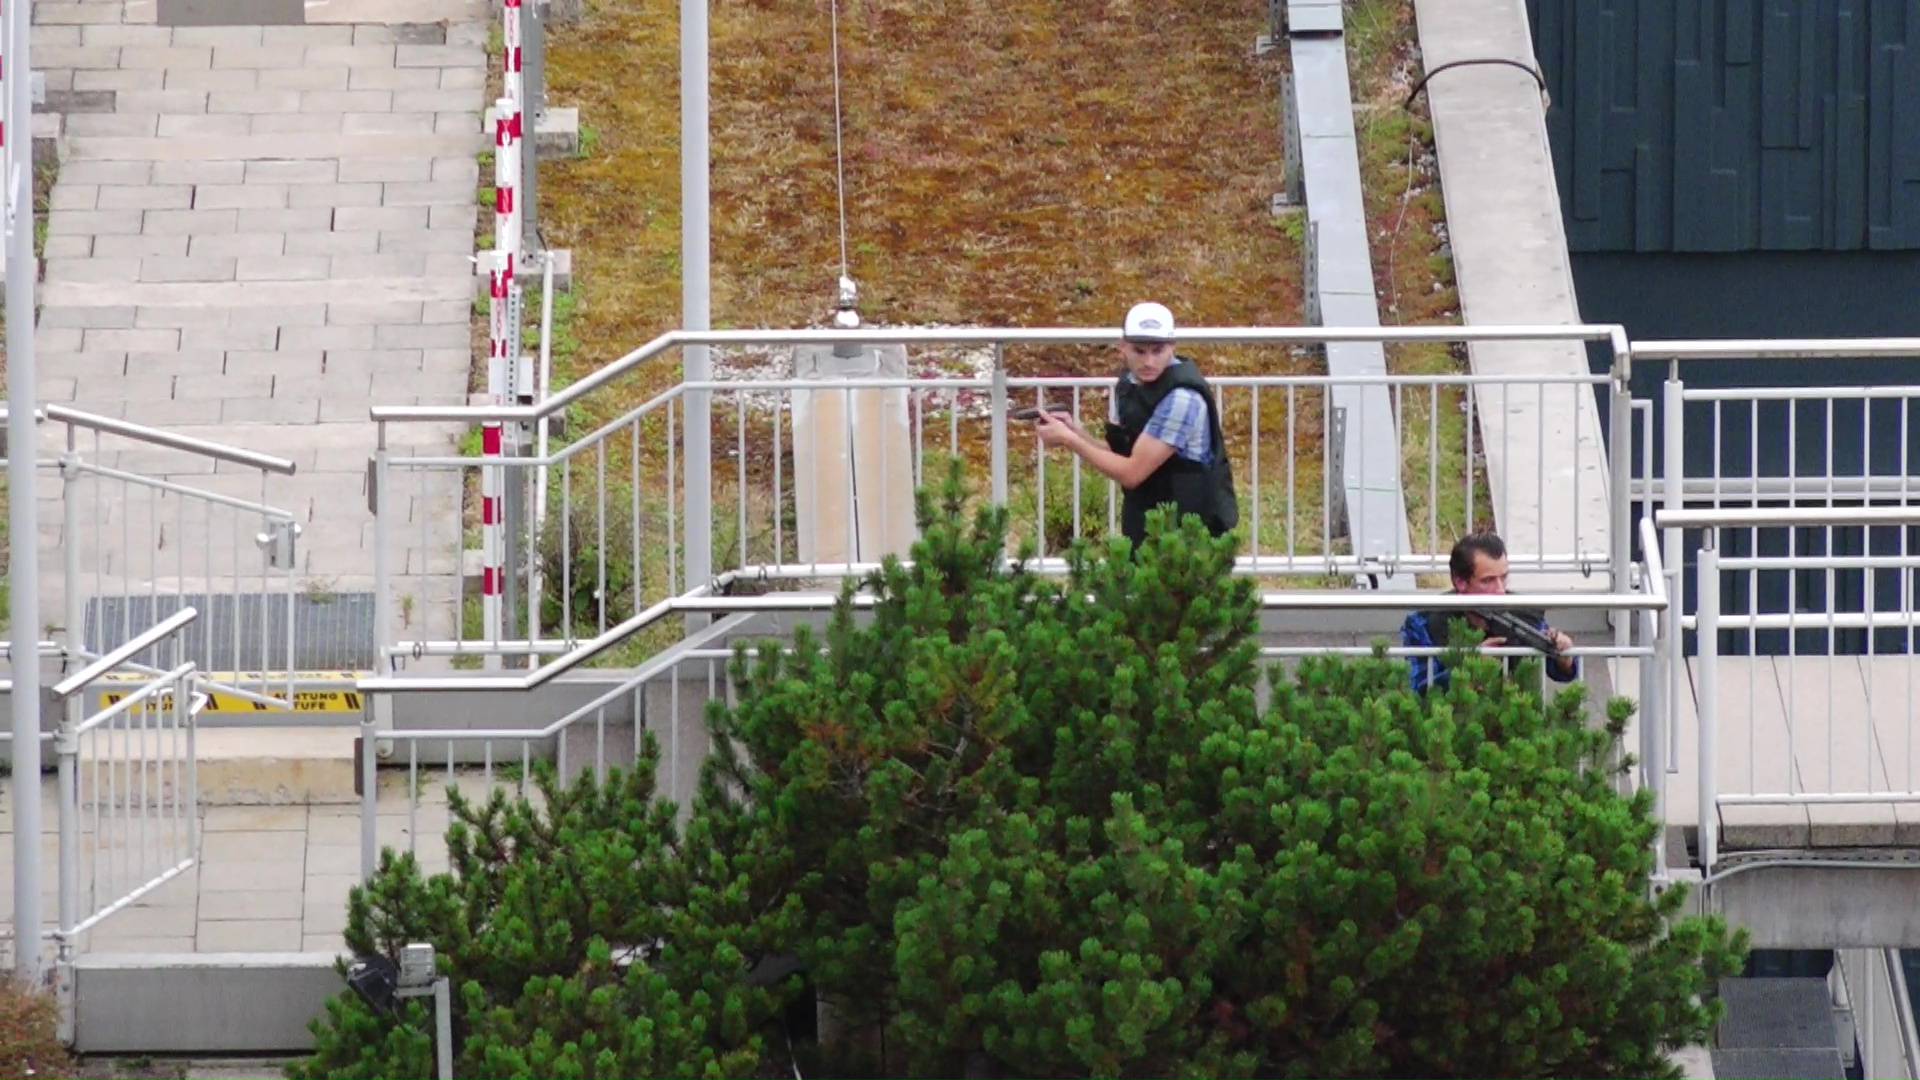 Plain clothes police officers attend scene of shooting rampage in Munich